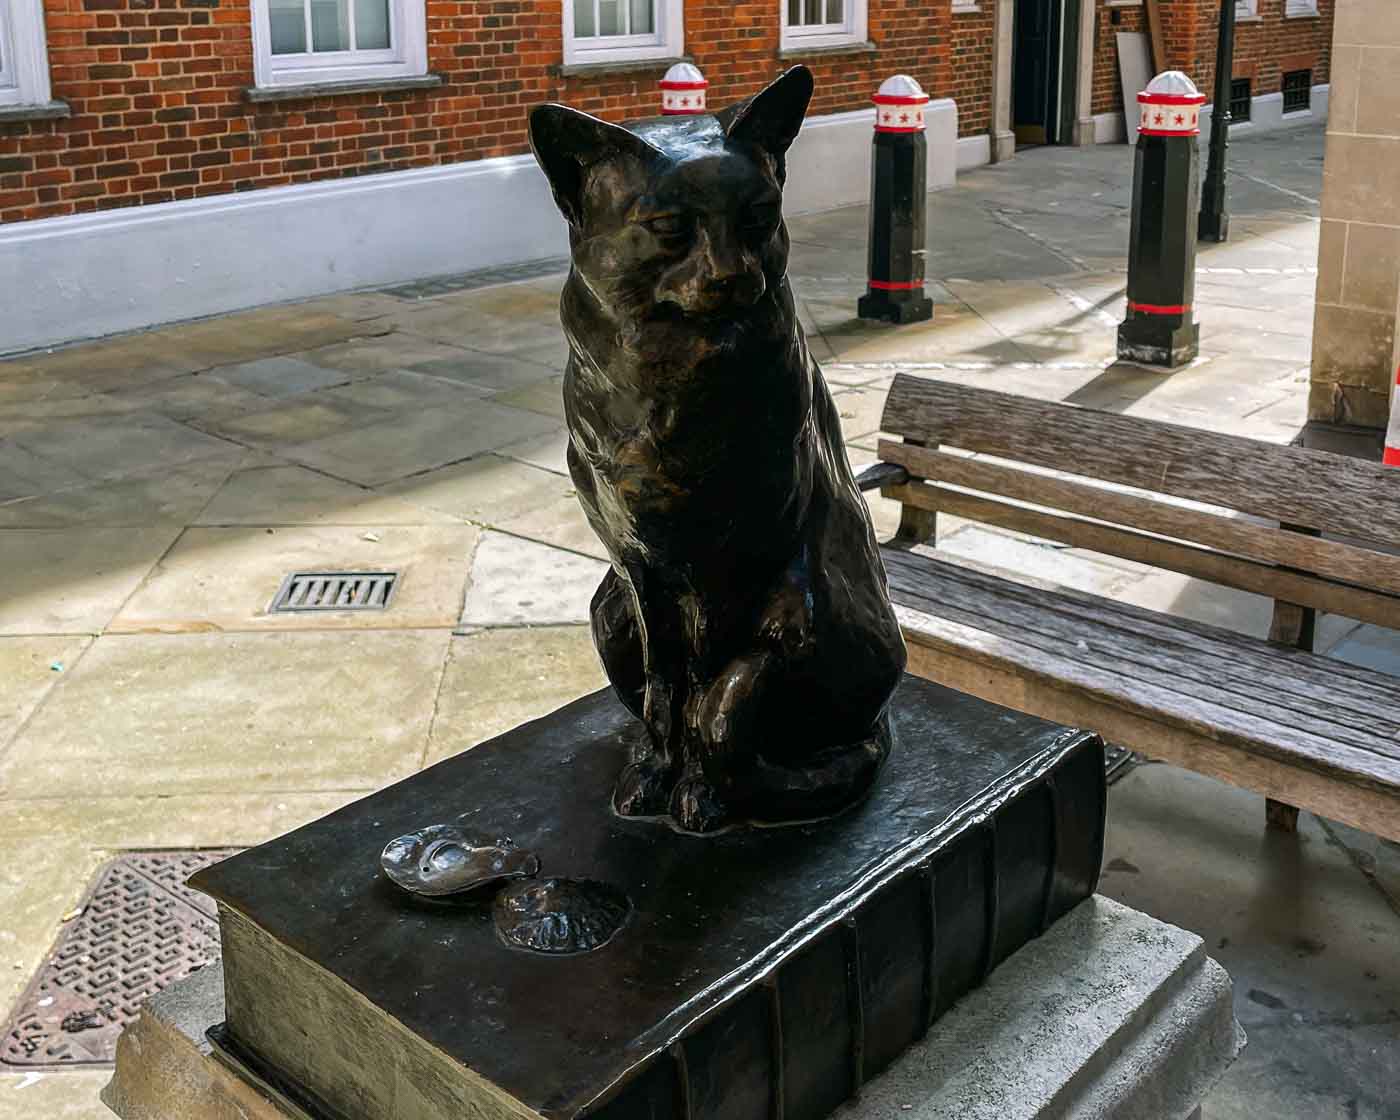 Animal lovers and literary enthusiasts, listen up! Have you ever heard of Hodge the Cat? If you have, be aware that he wasn't just any cat. This pampered kitty was the beloved pet of Samuel Johnson, the famous writer who created the first English dictionary.